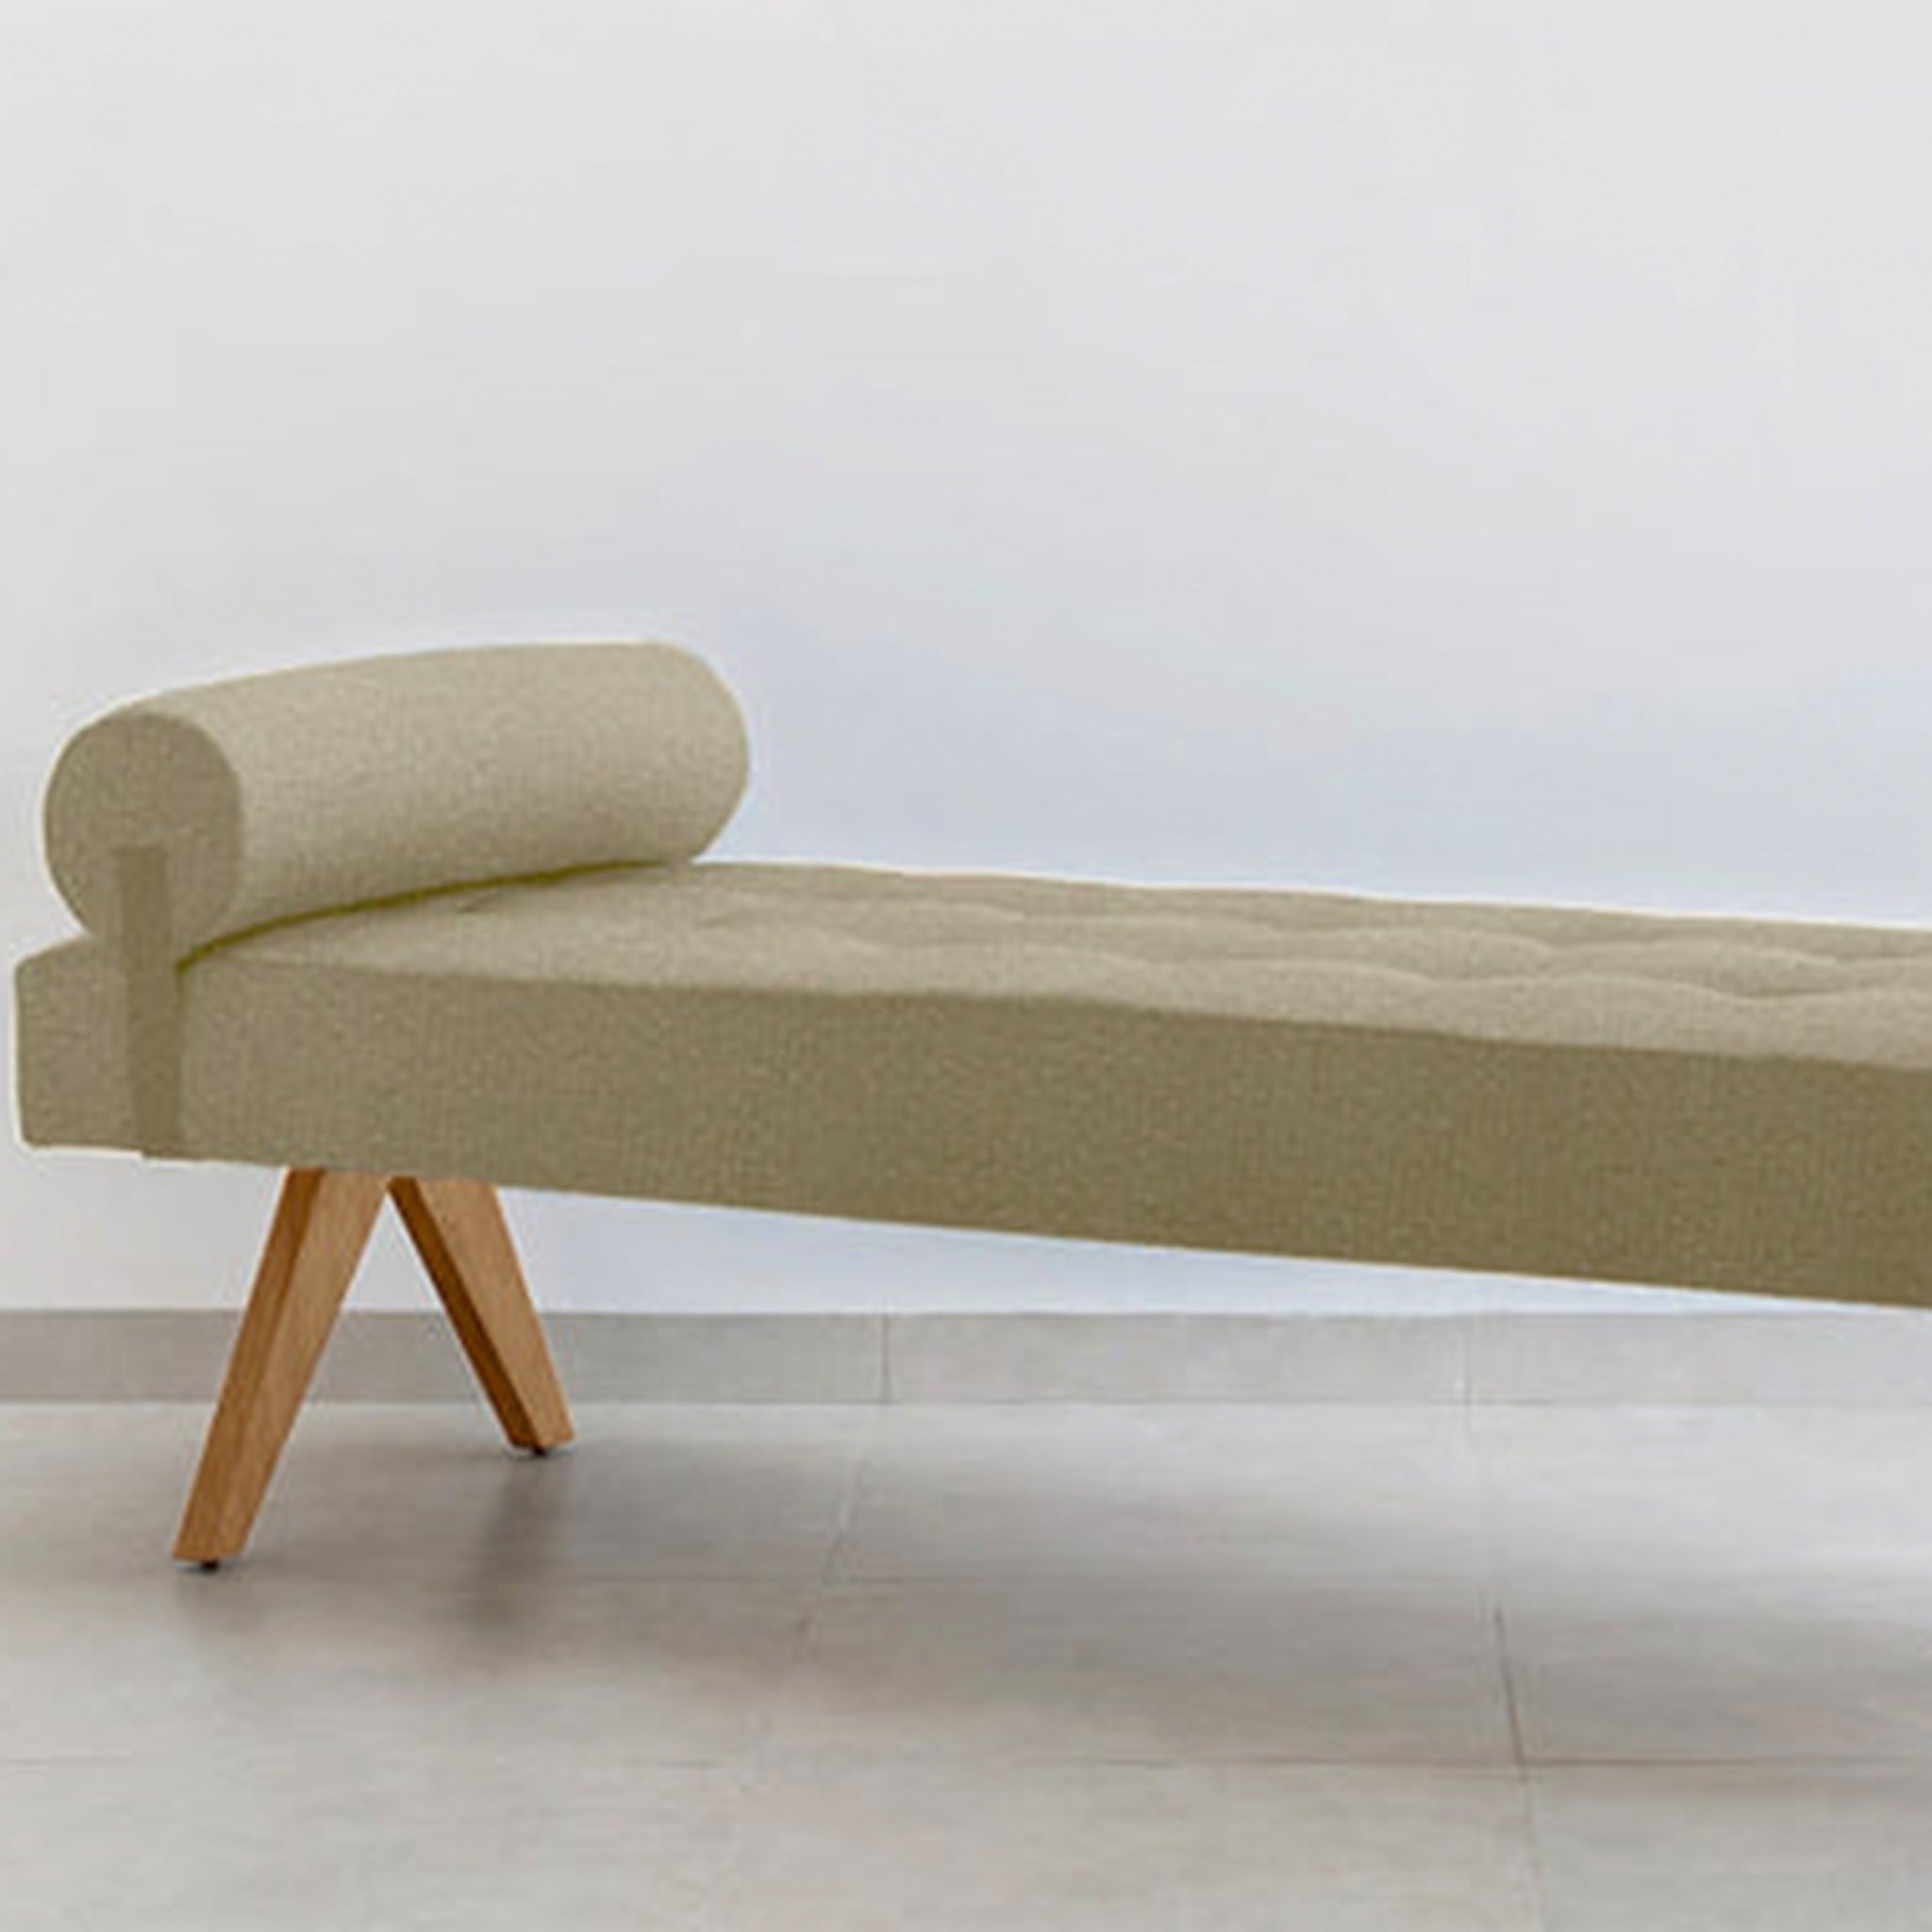 The Jack Daybed for a comfortable lounging experience